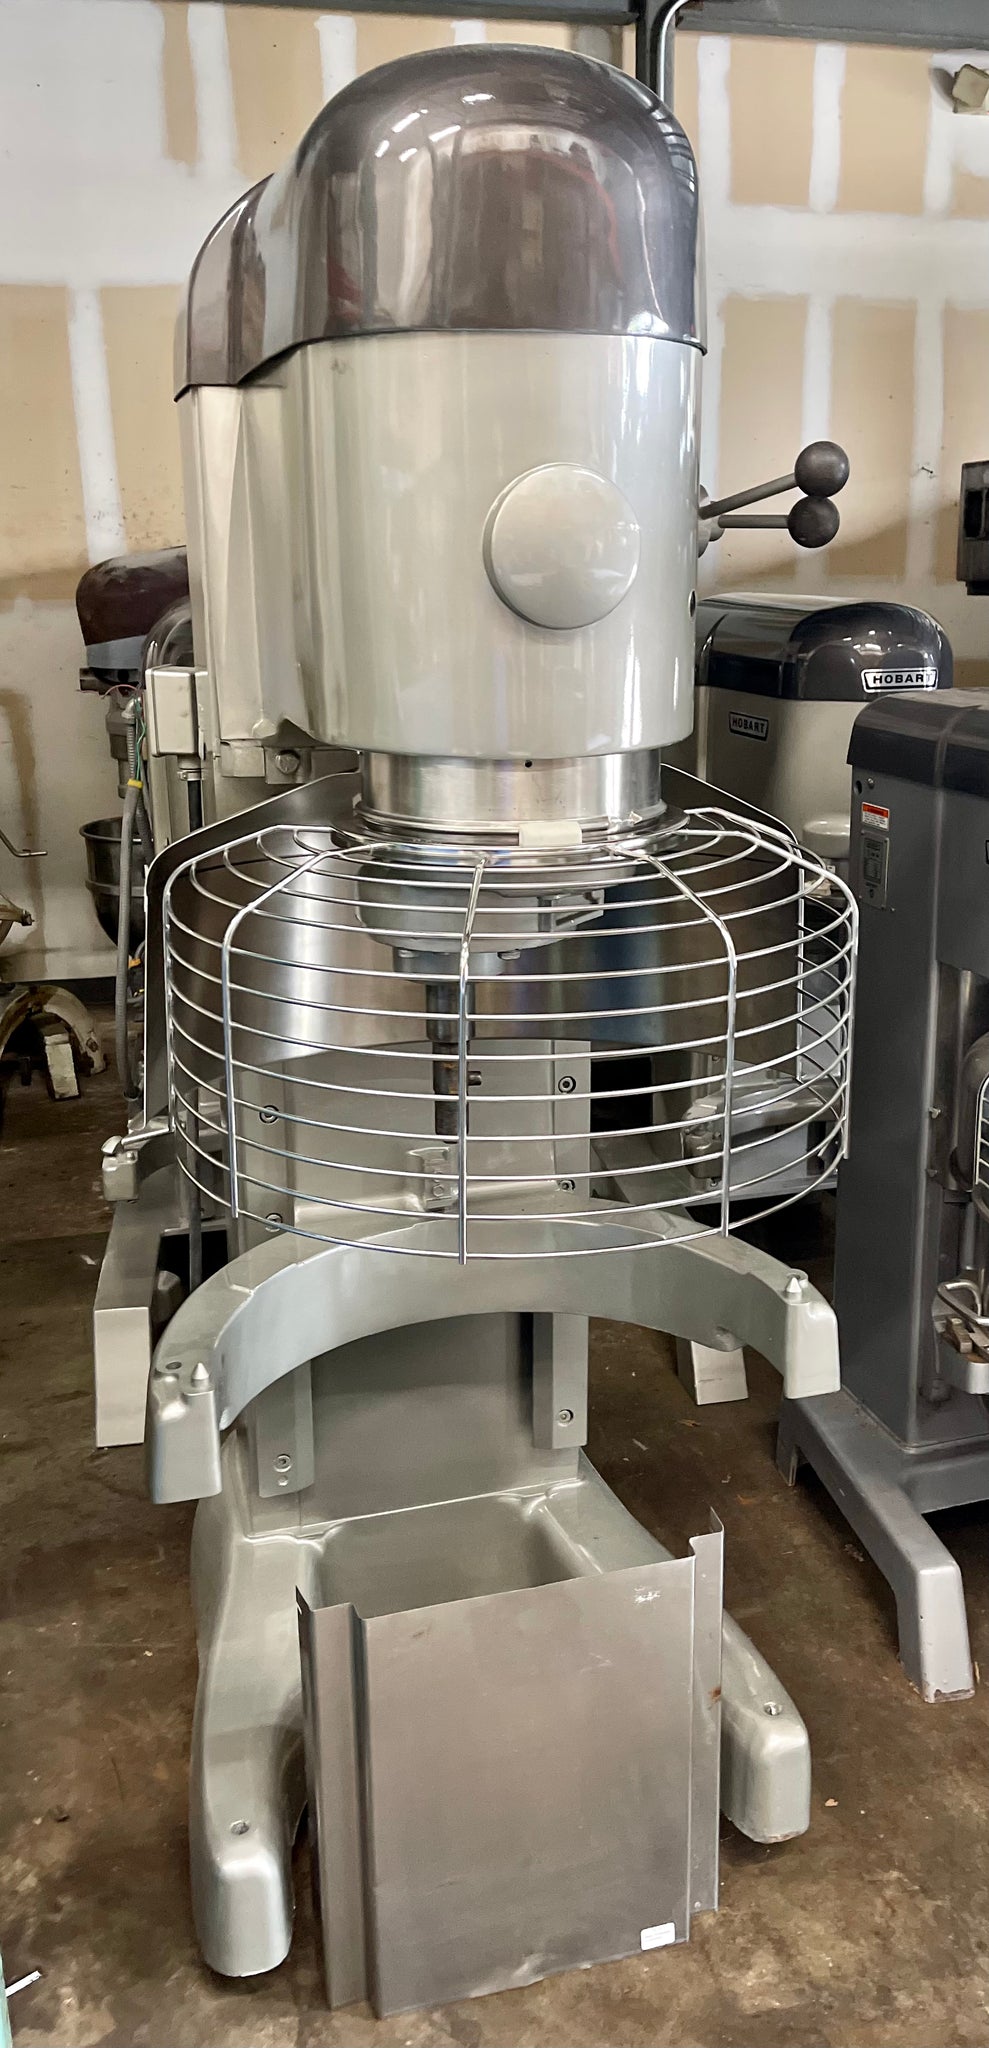 Hobart 140 quart mixer comes with a stainless steel bowl and one attachment